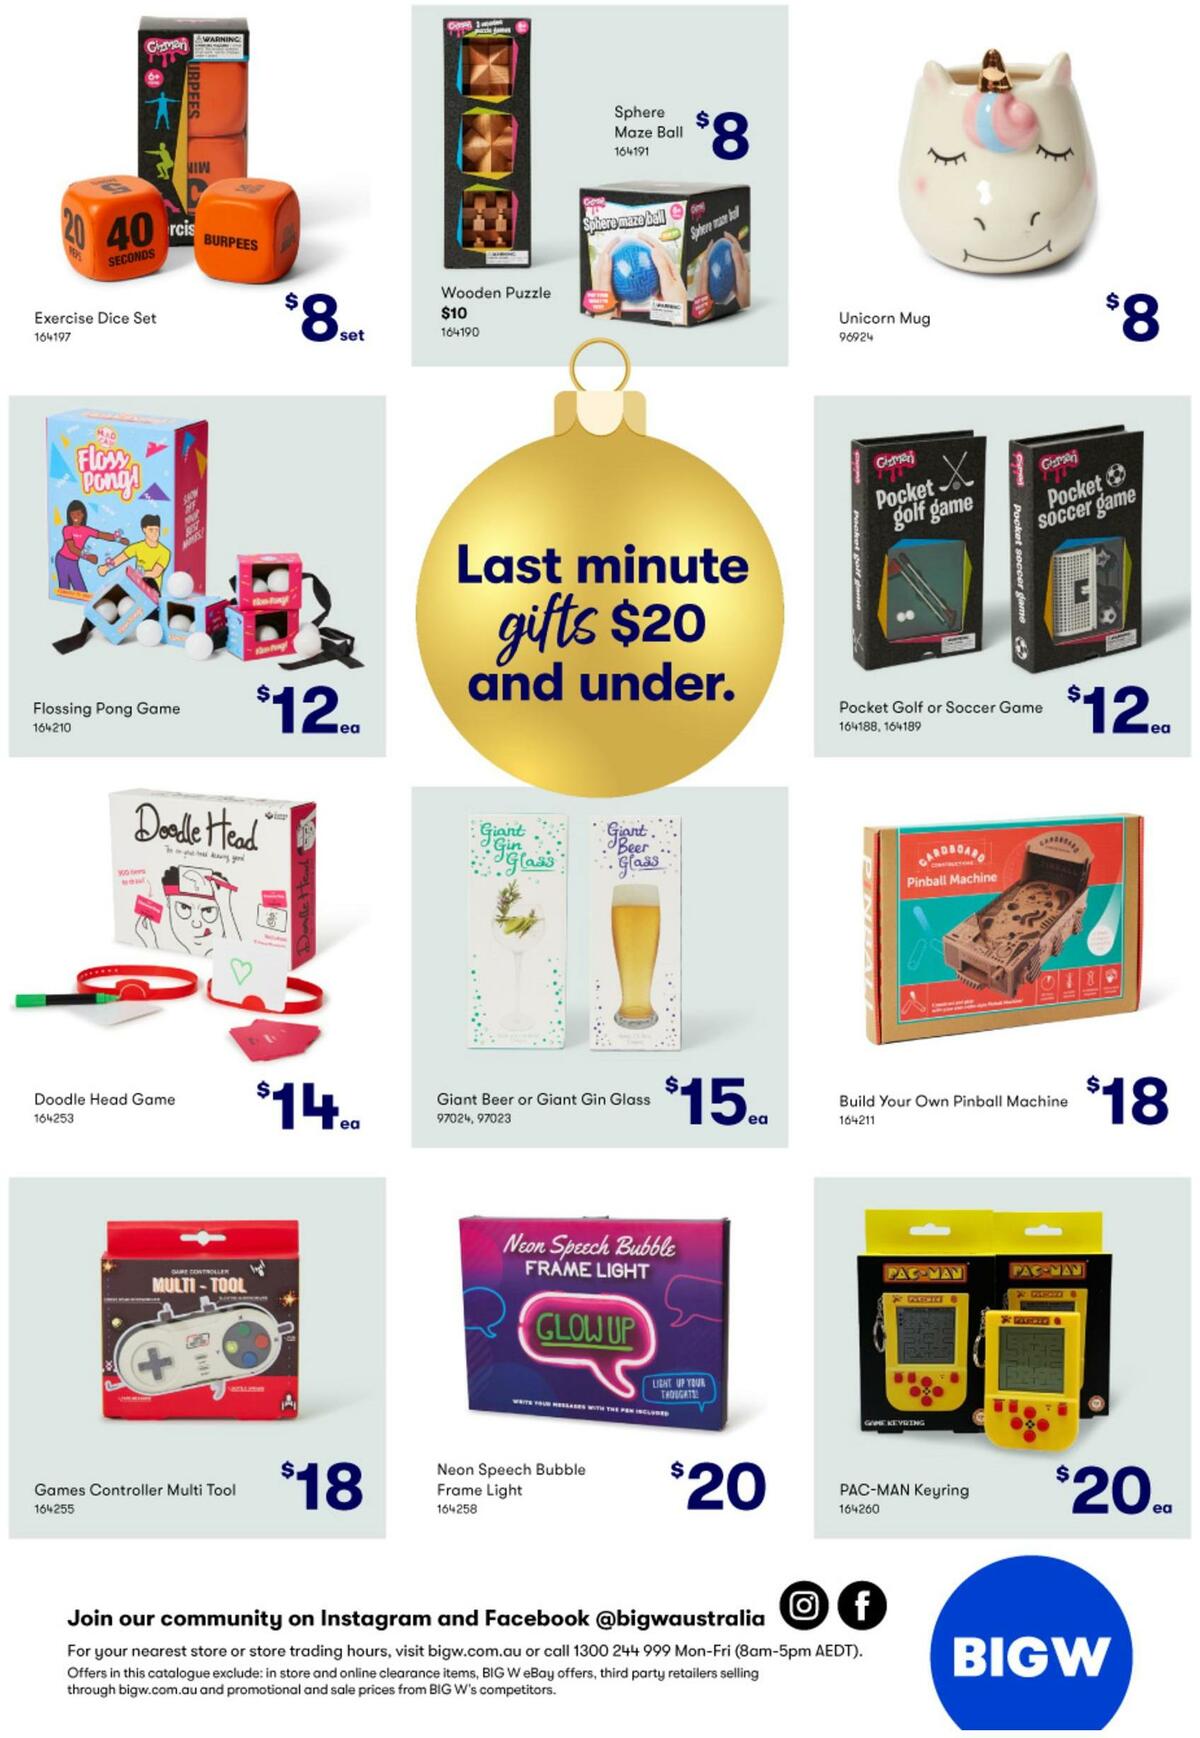 Big W Catalogues from 9 December